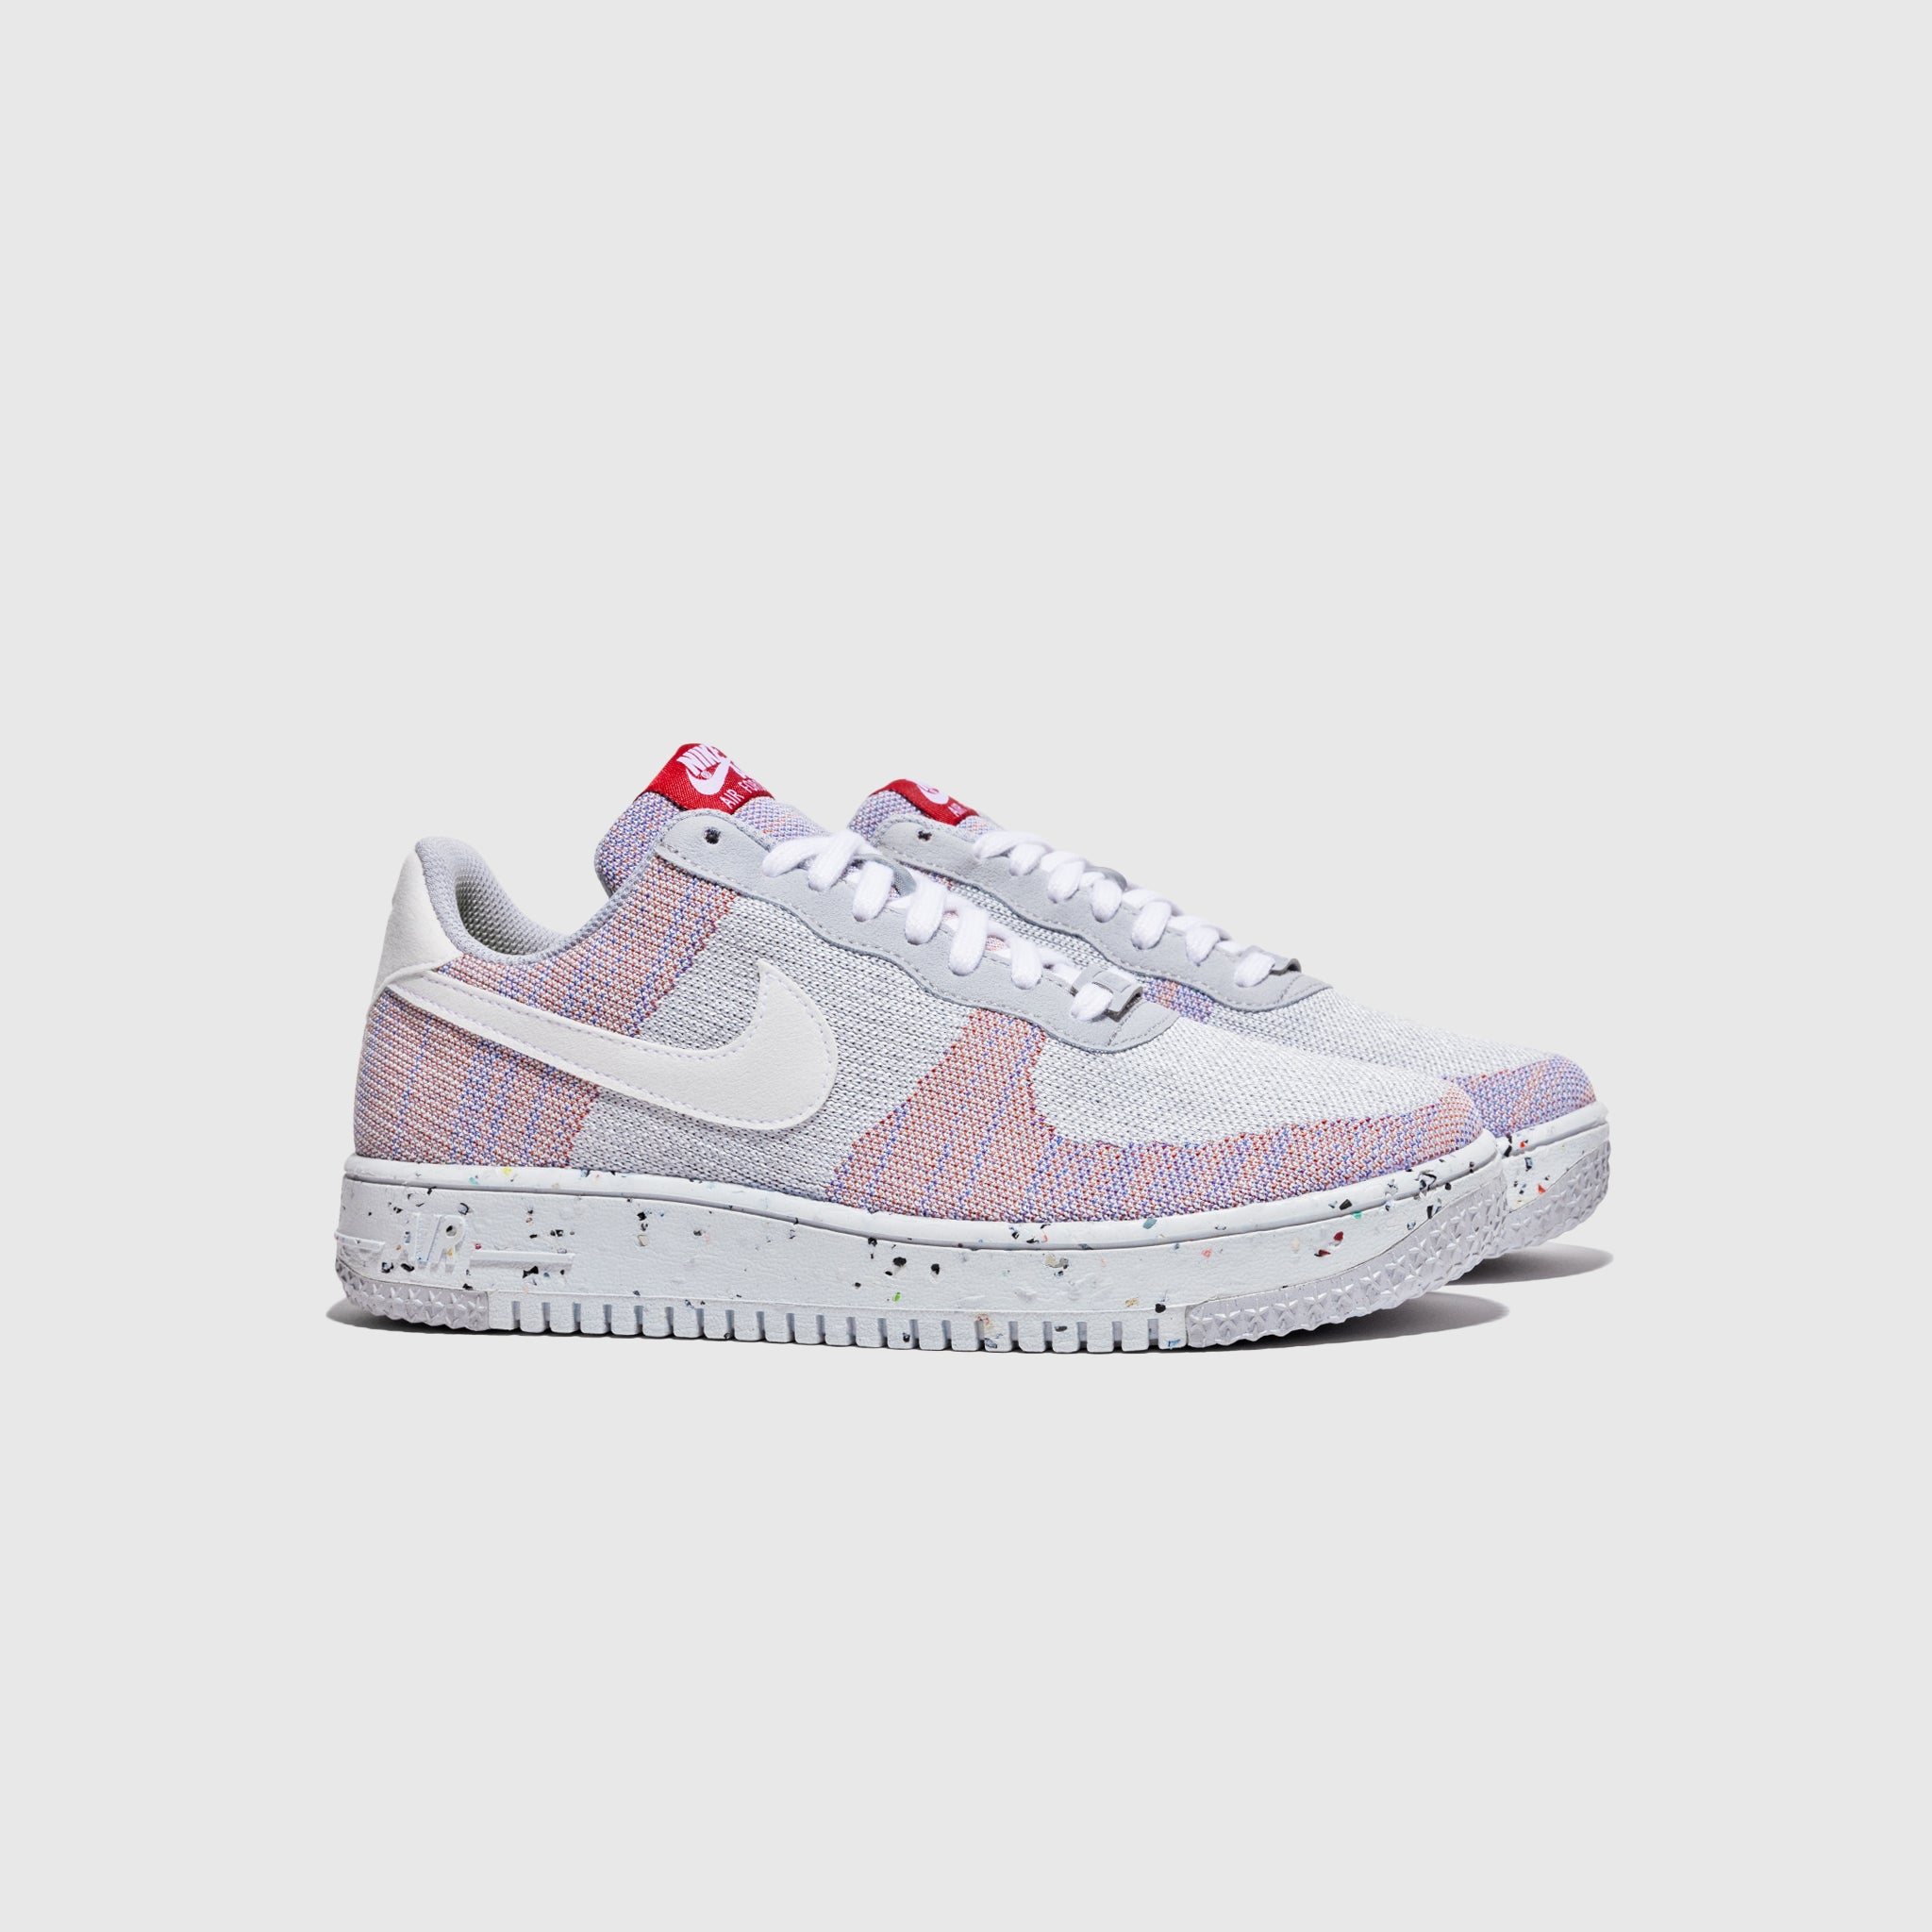 AIR FORCE 1 CRATER FLYKNIT "WOLF GREY"